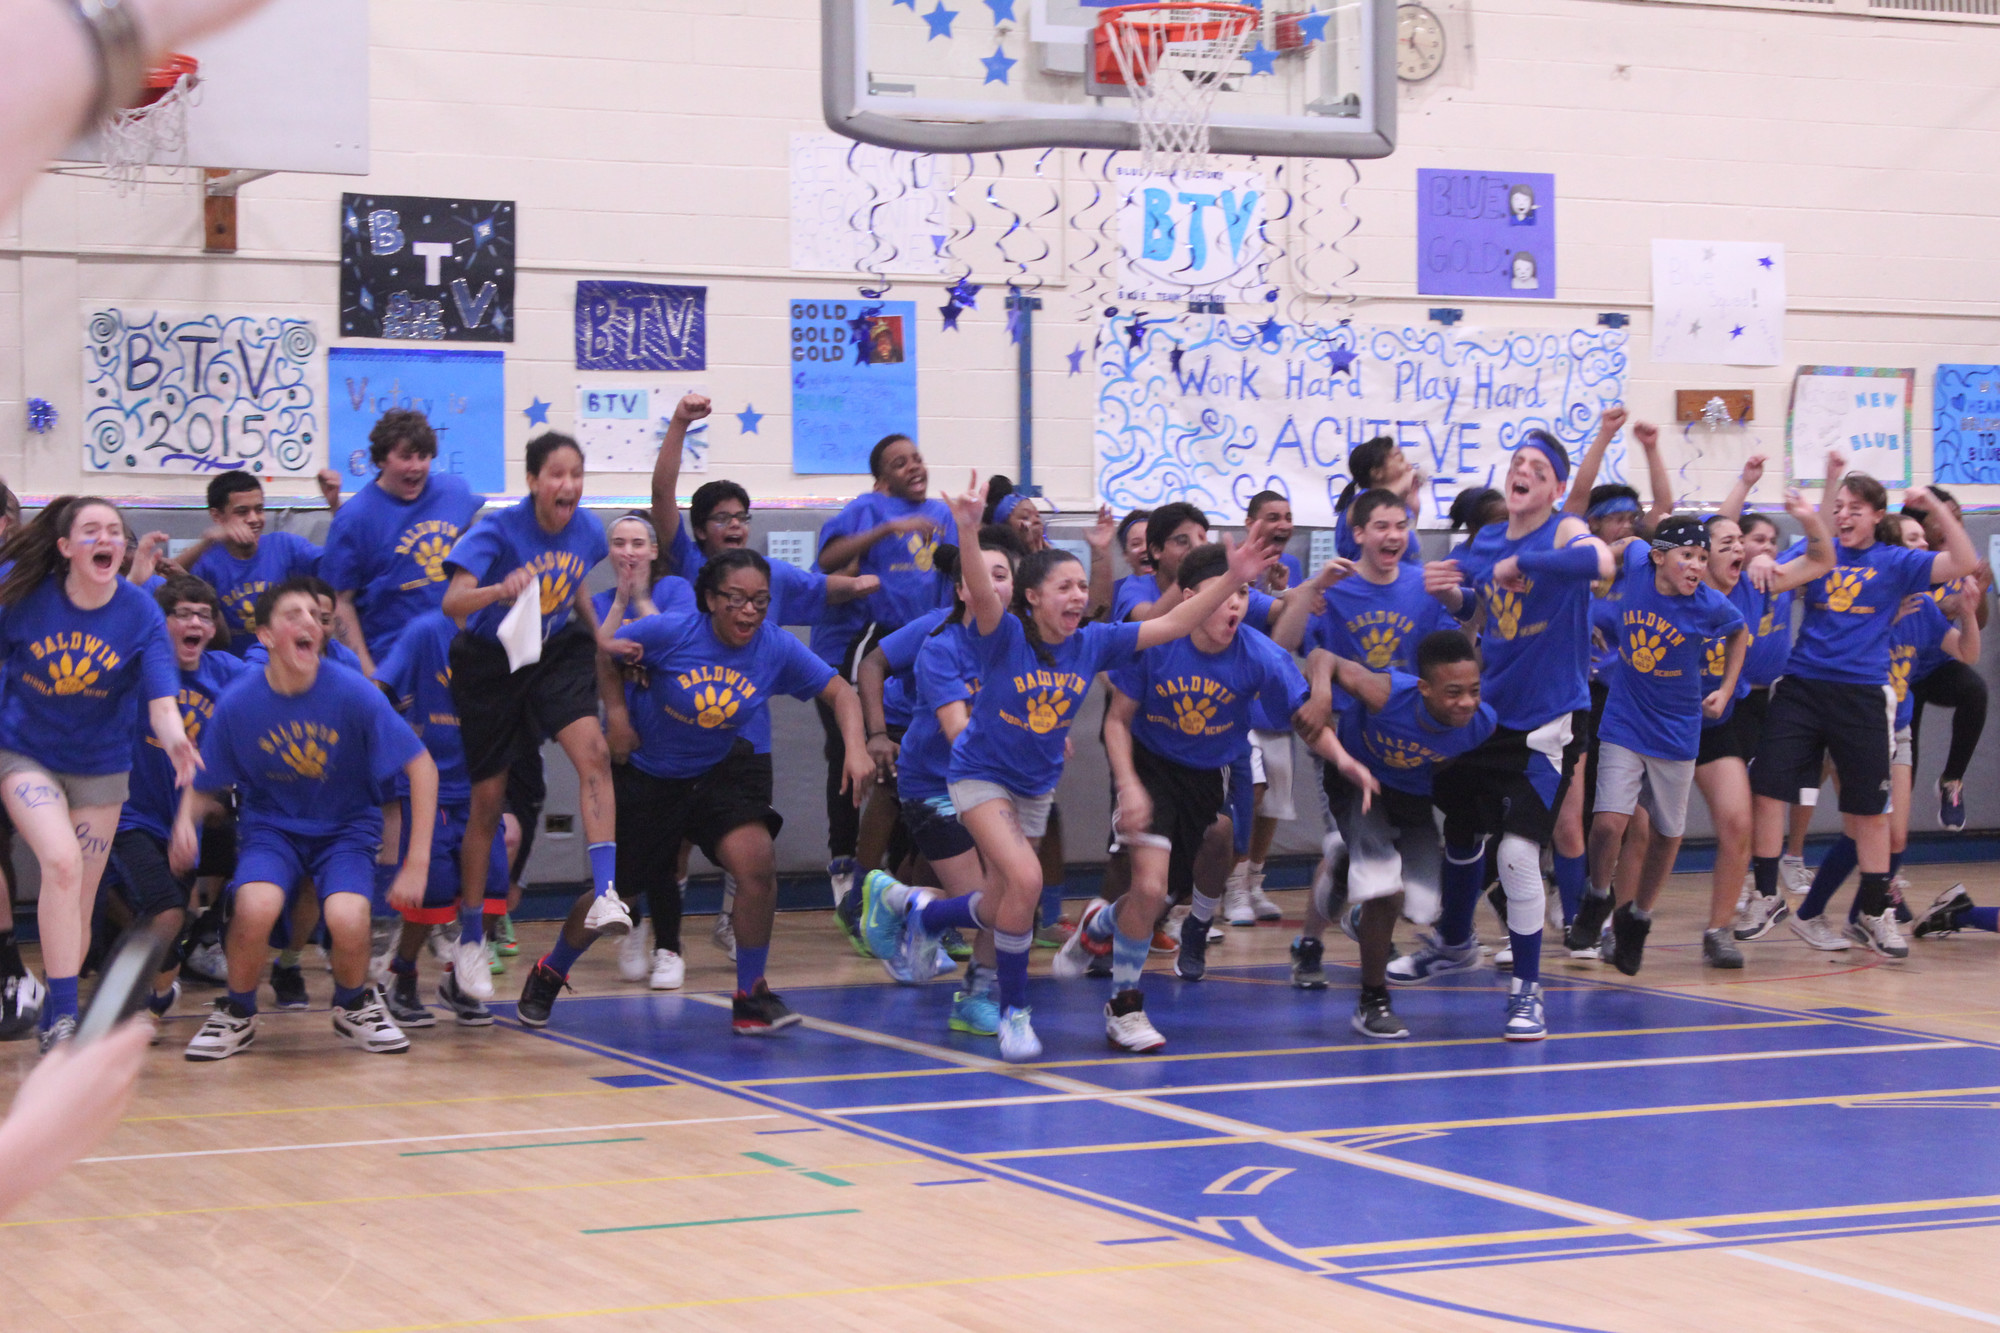 The Blue Team celebrated its victory in the 27th annual Blue & Gold competition at Baldwin Middle School last Friday.